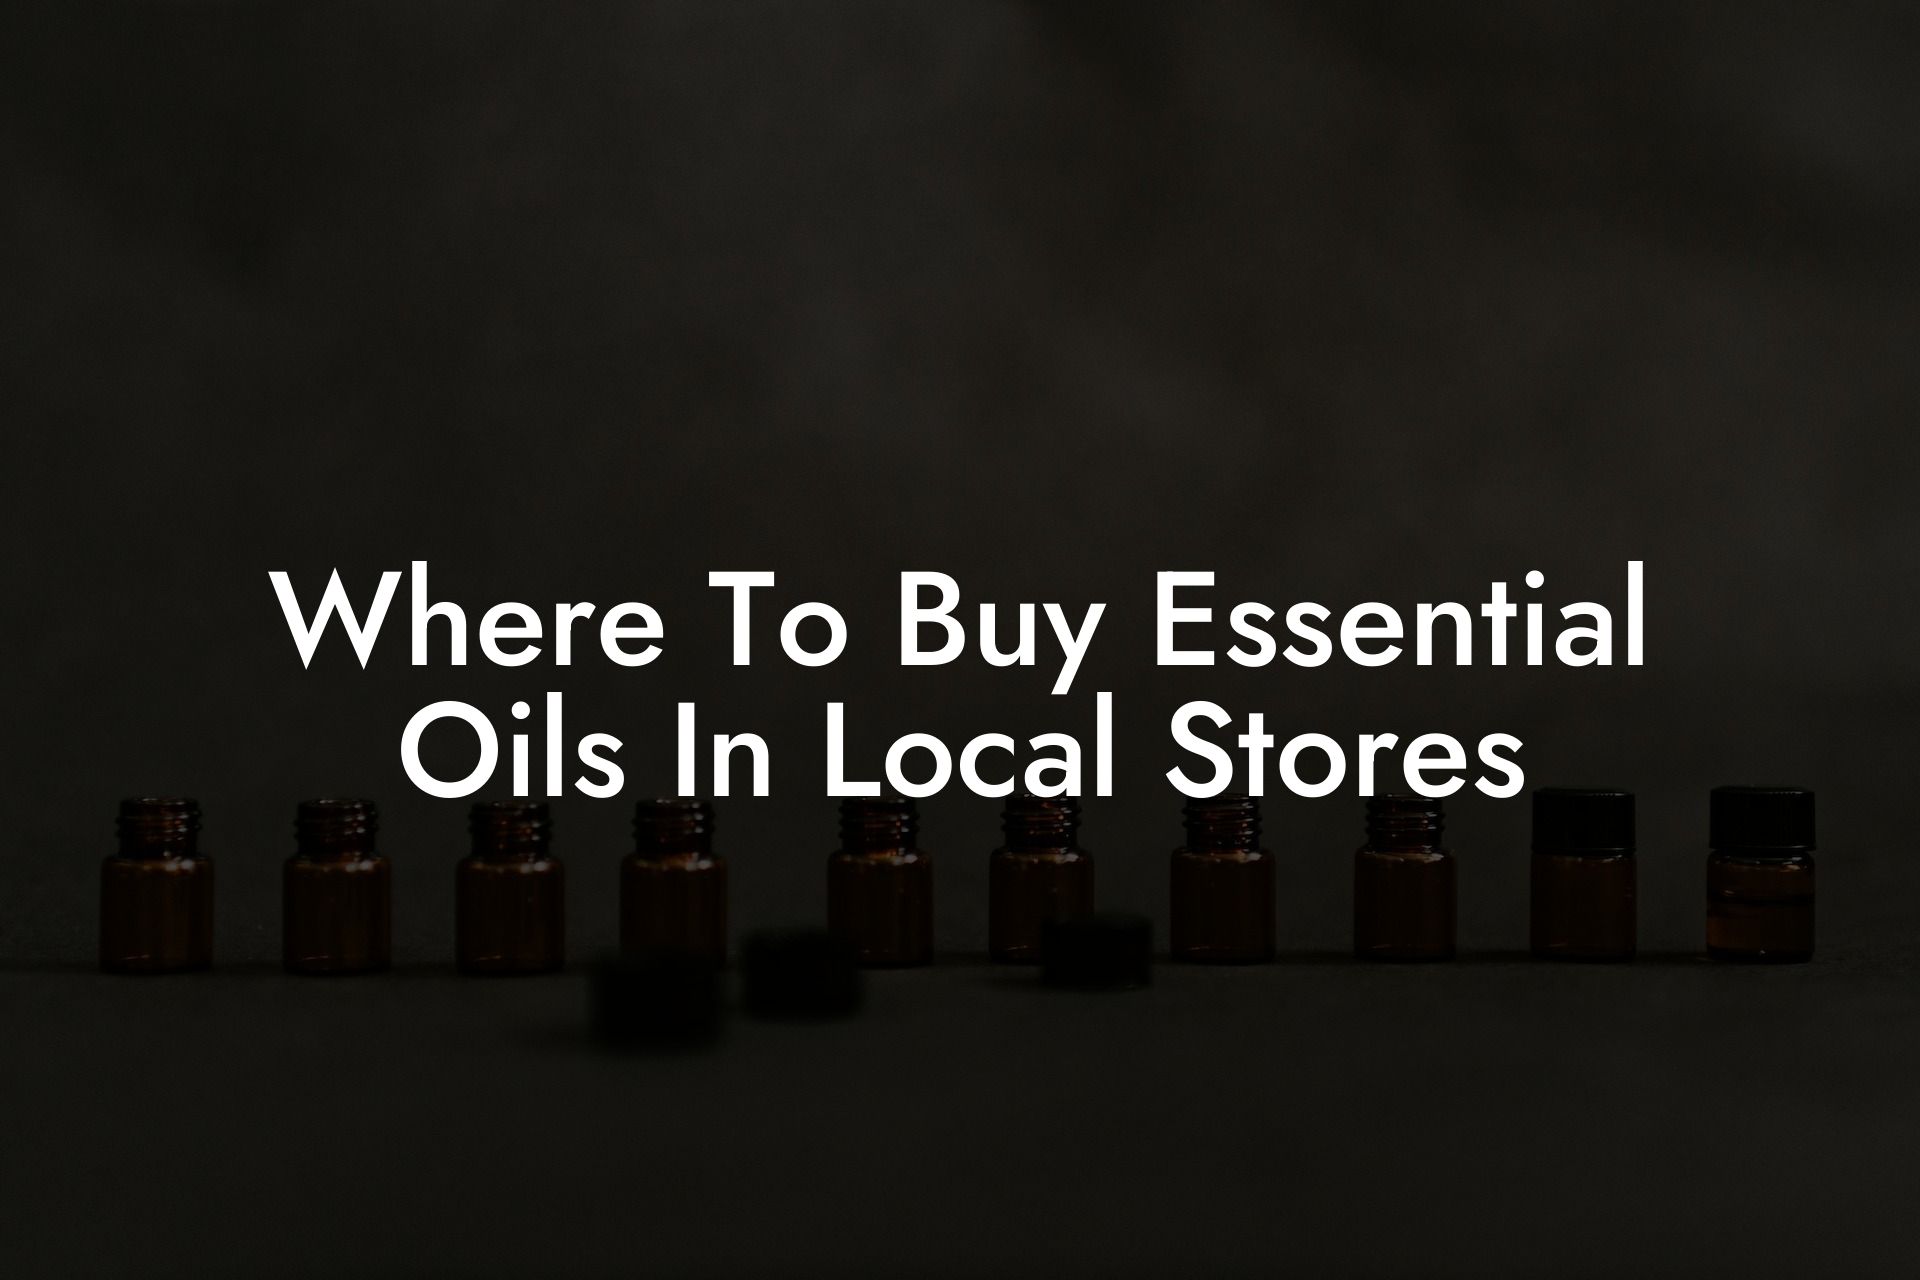 Where To Buy Essential Oils In Local Stores